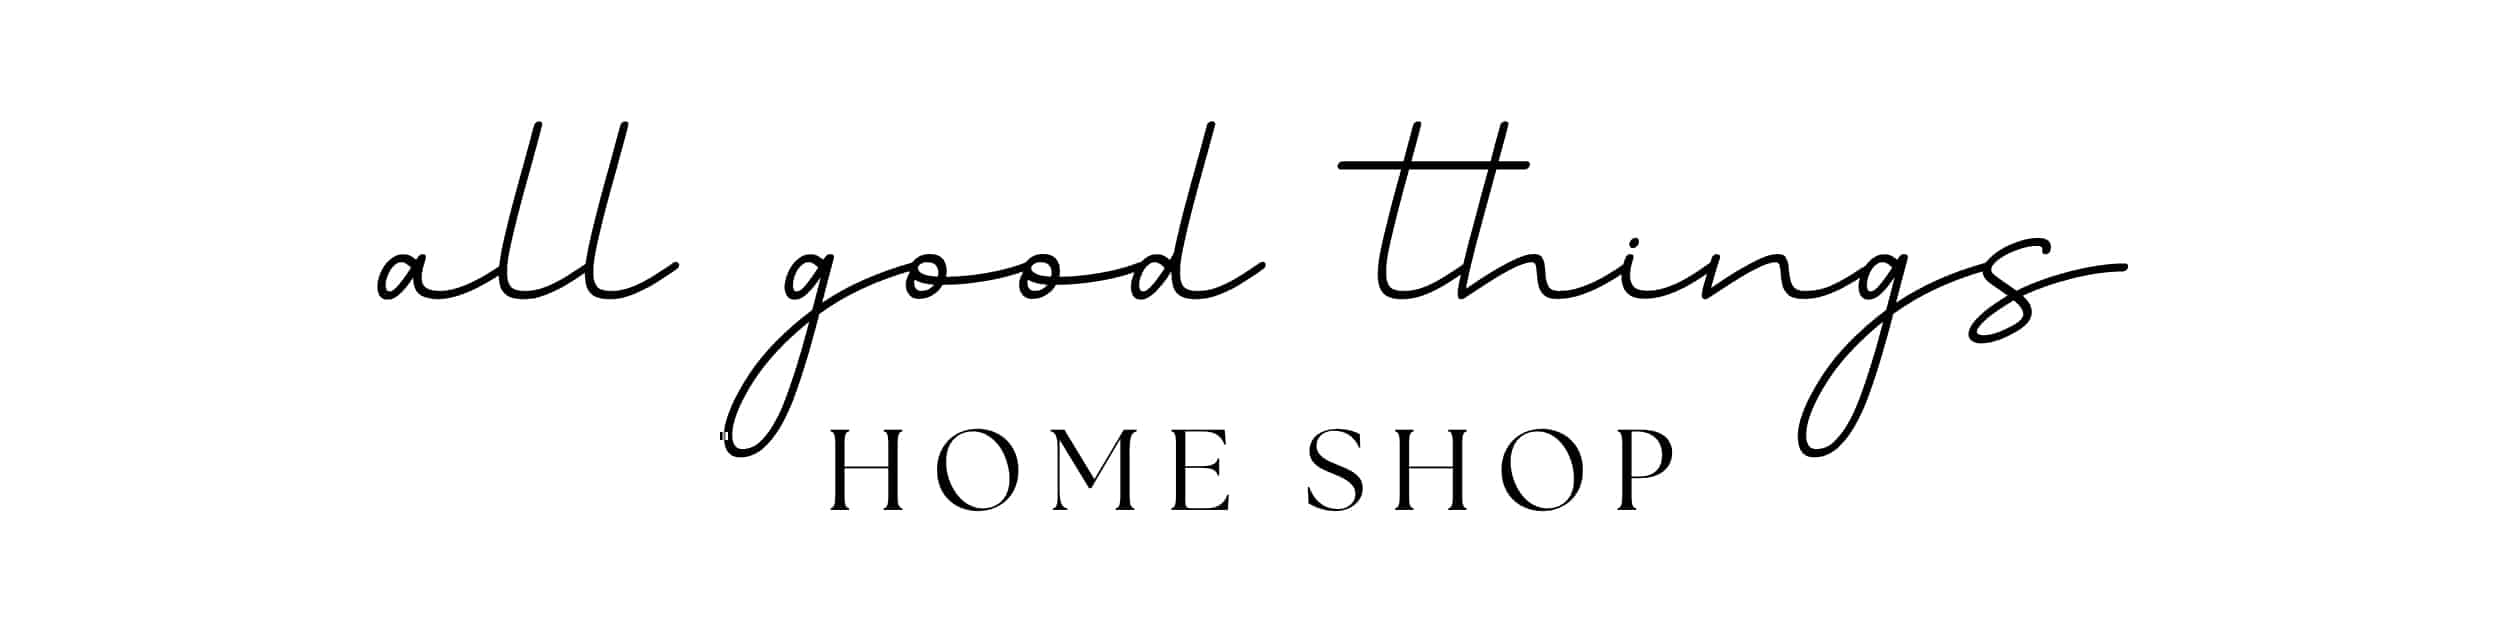 Babies + Kids: All Good Things Home Shop